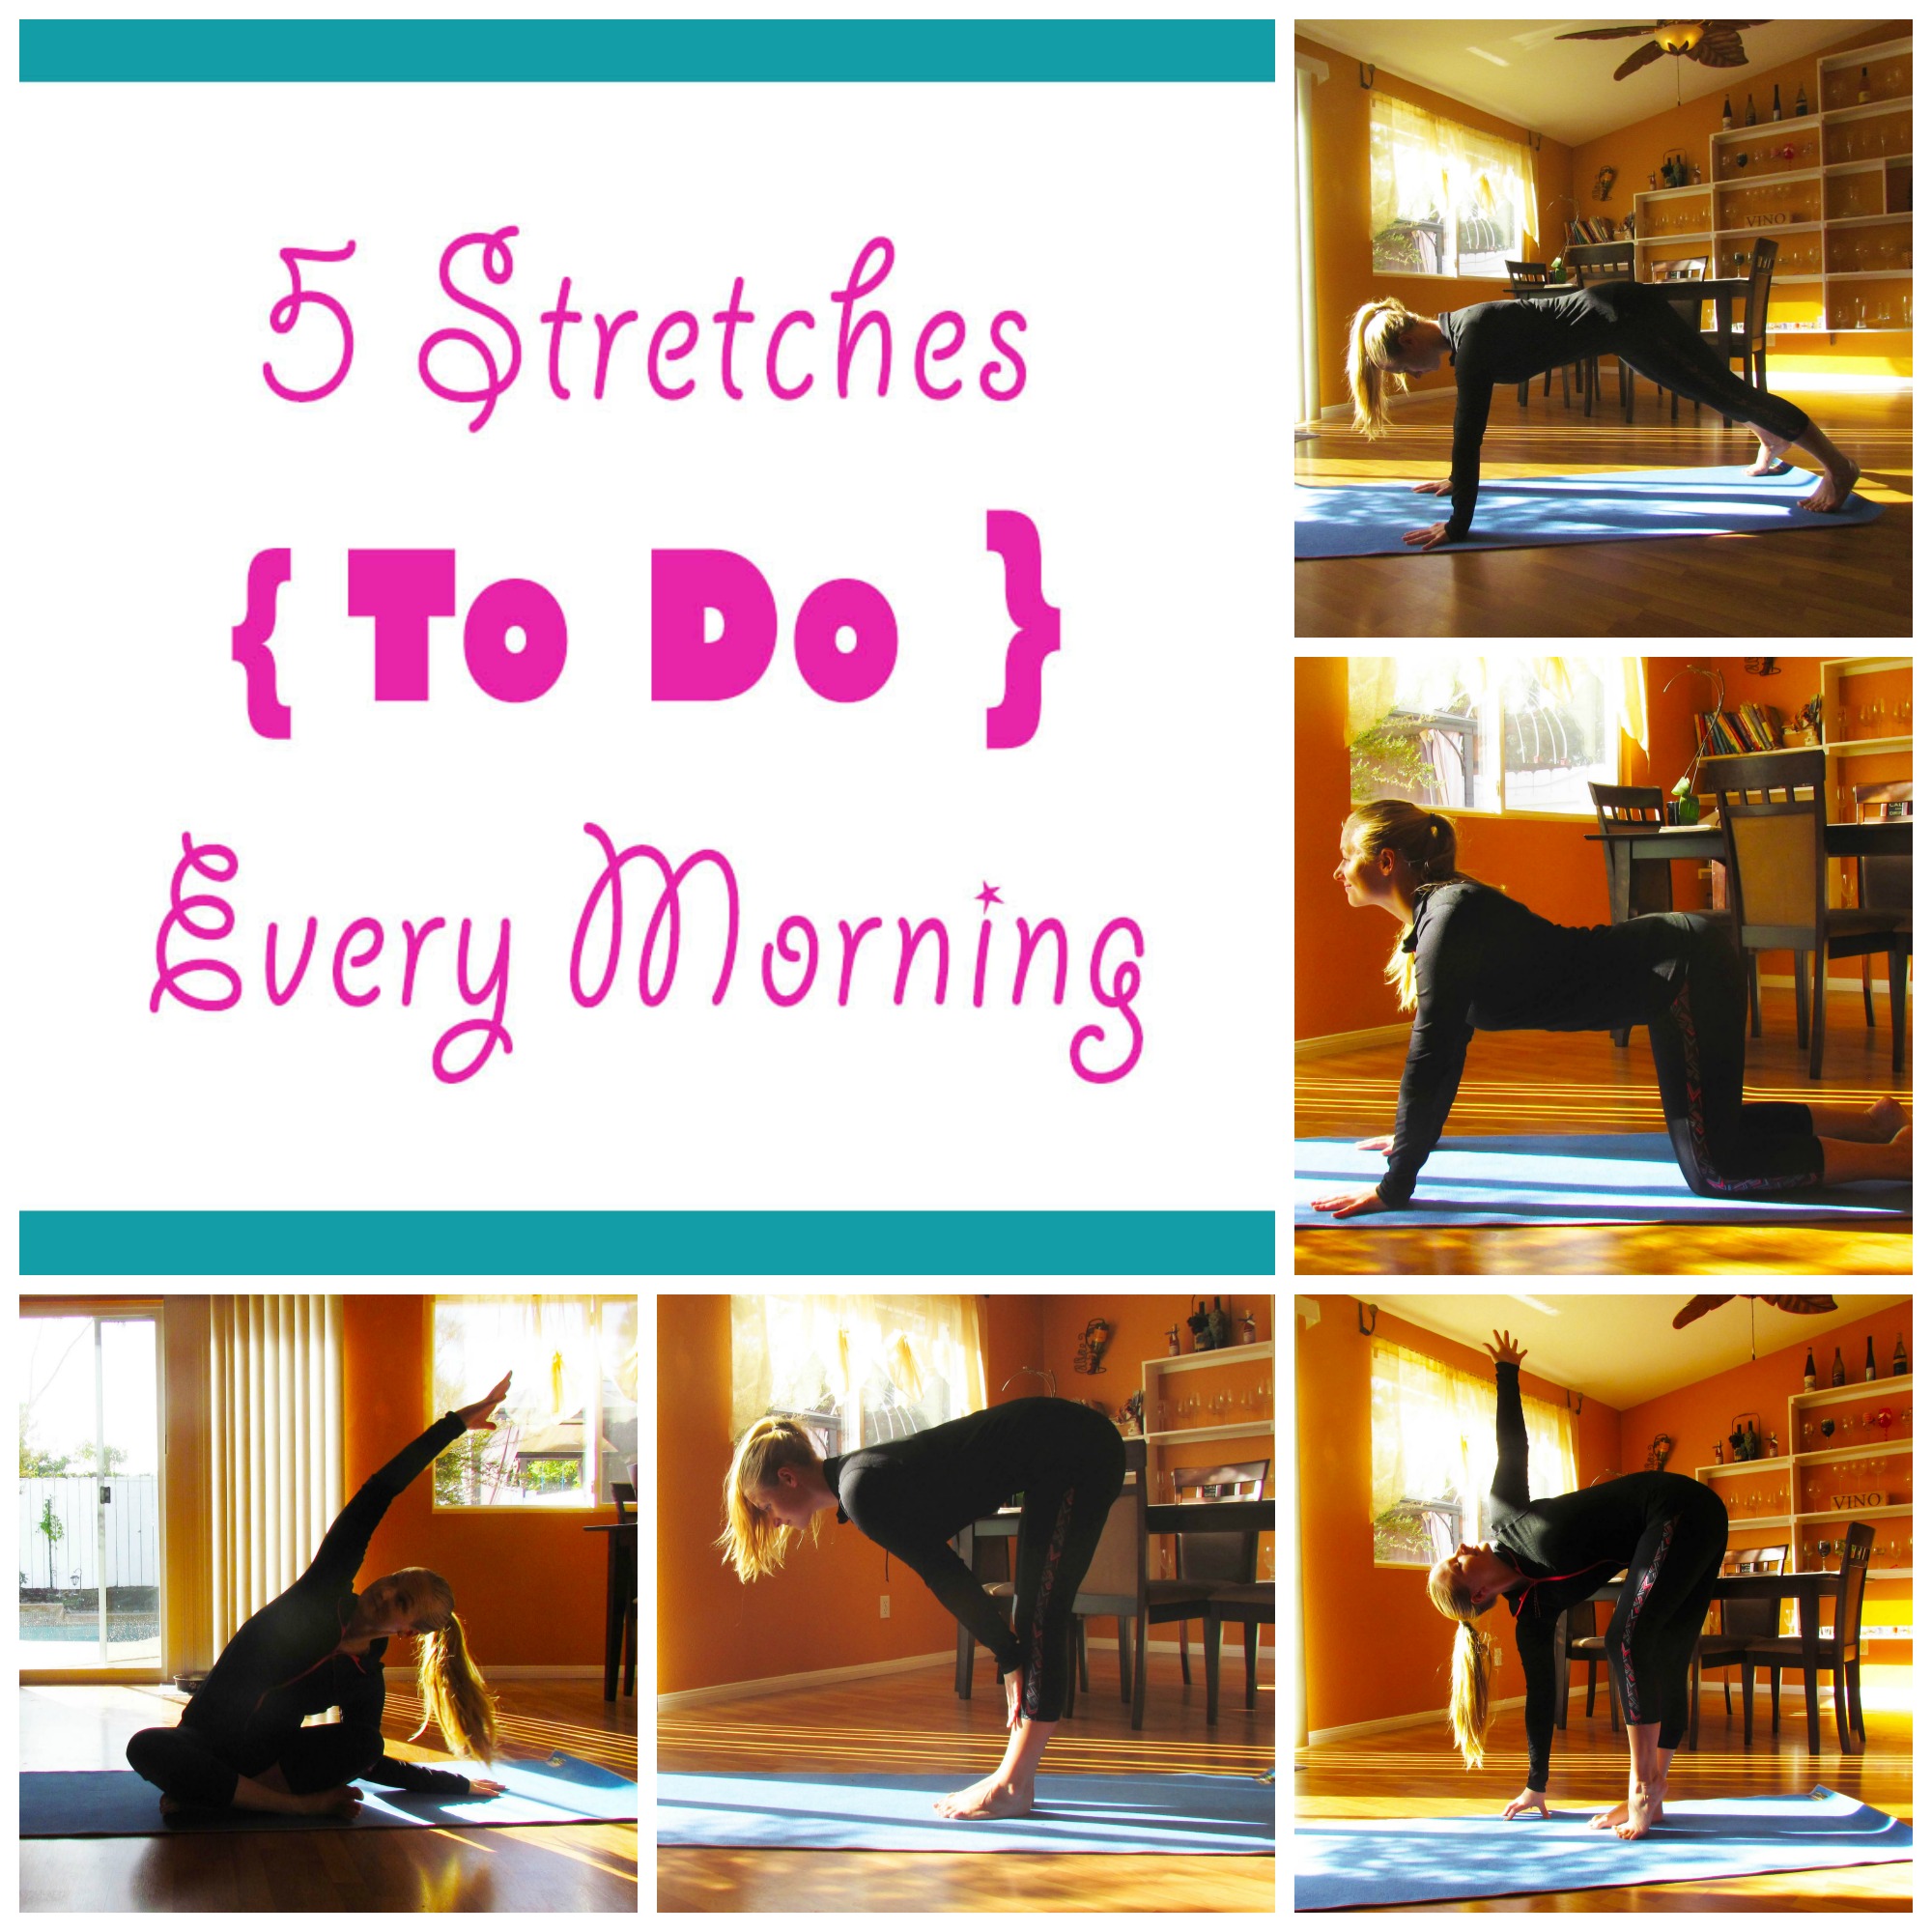 Morning Stretches Collage